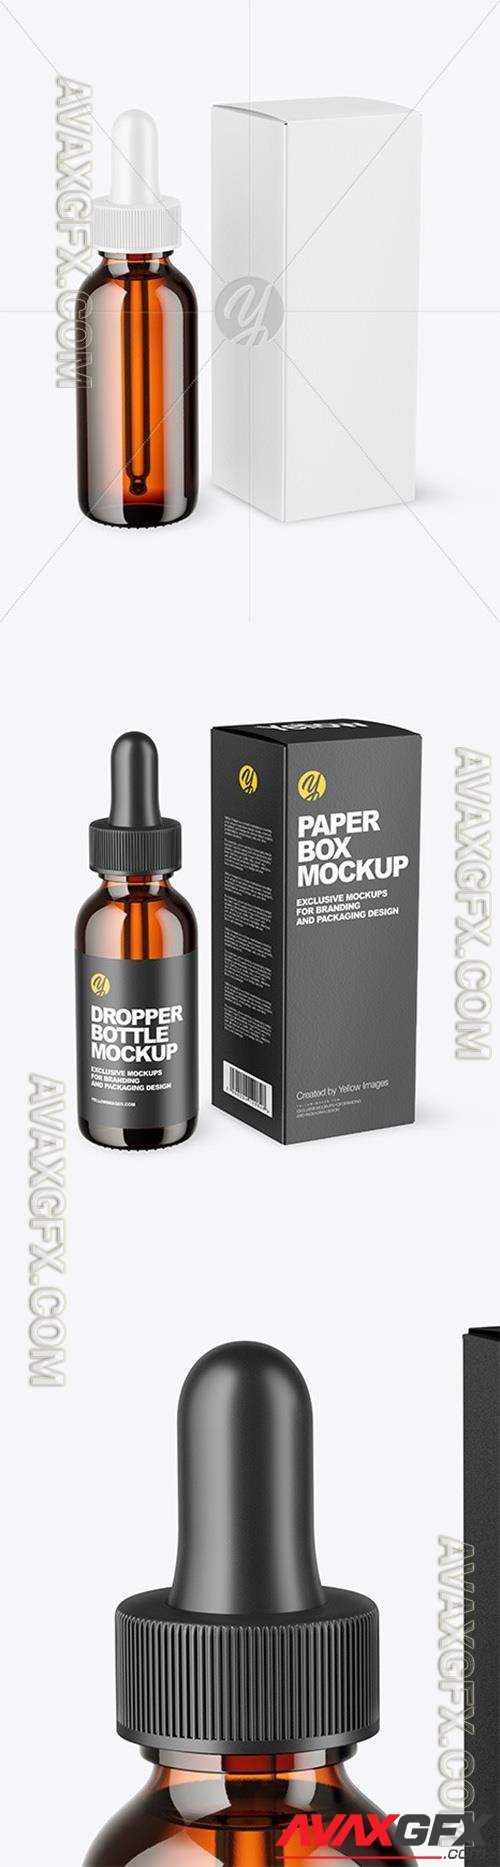 Amber Glass Dropper Bottle with Paper Box Mockup 73243 TIF